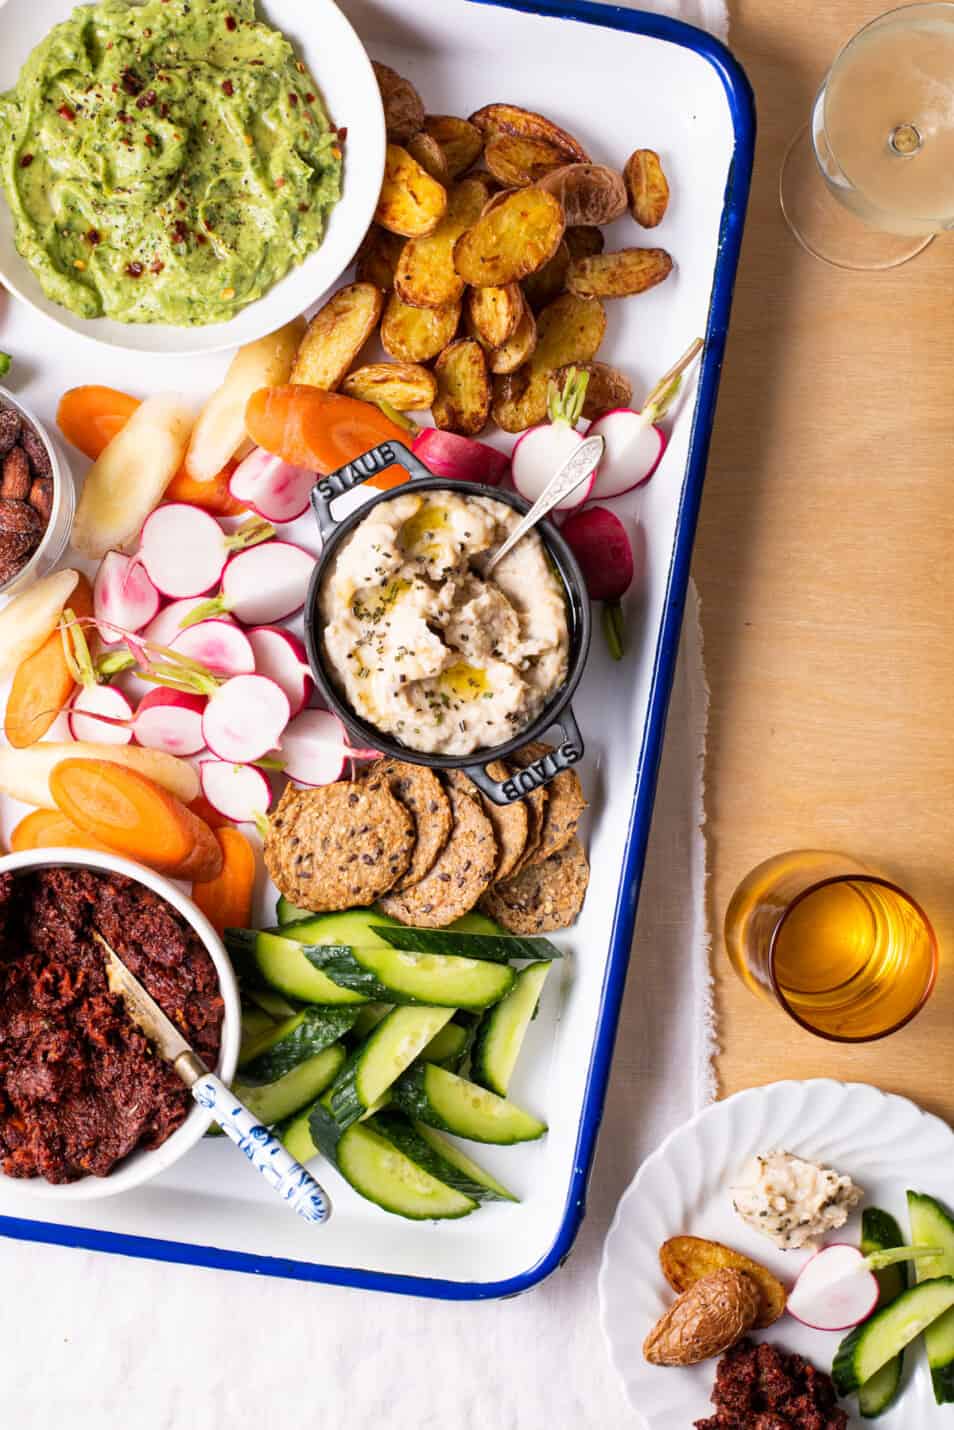 A festive vegan snack board with a trio of dips, colorful crudités, and roasted baby potatoes.